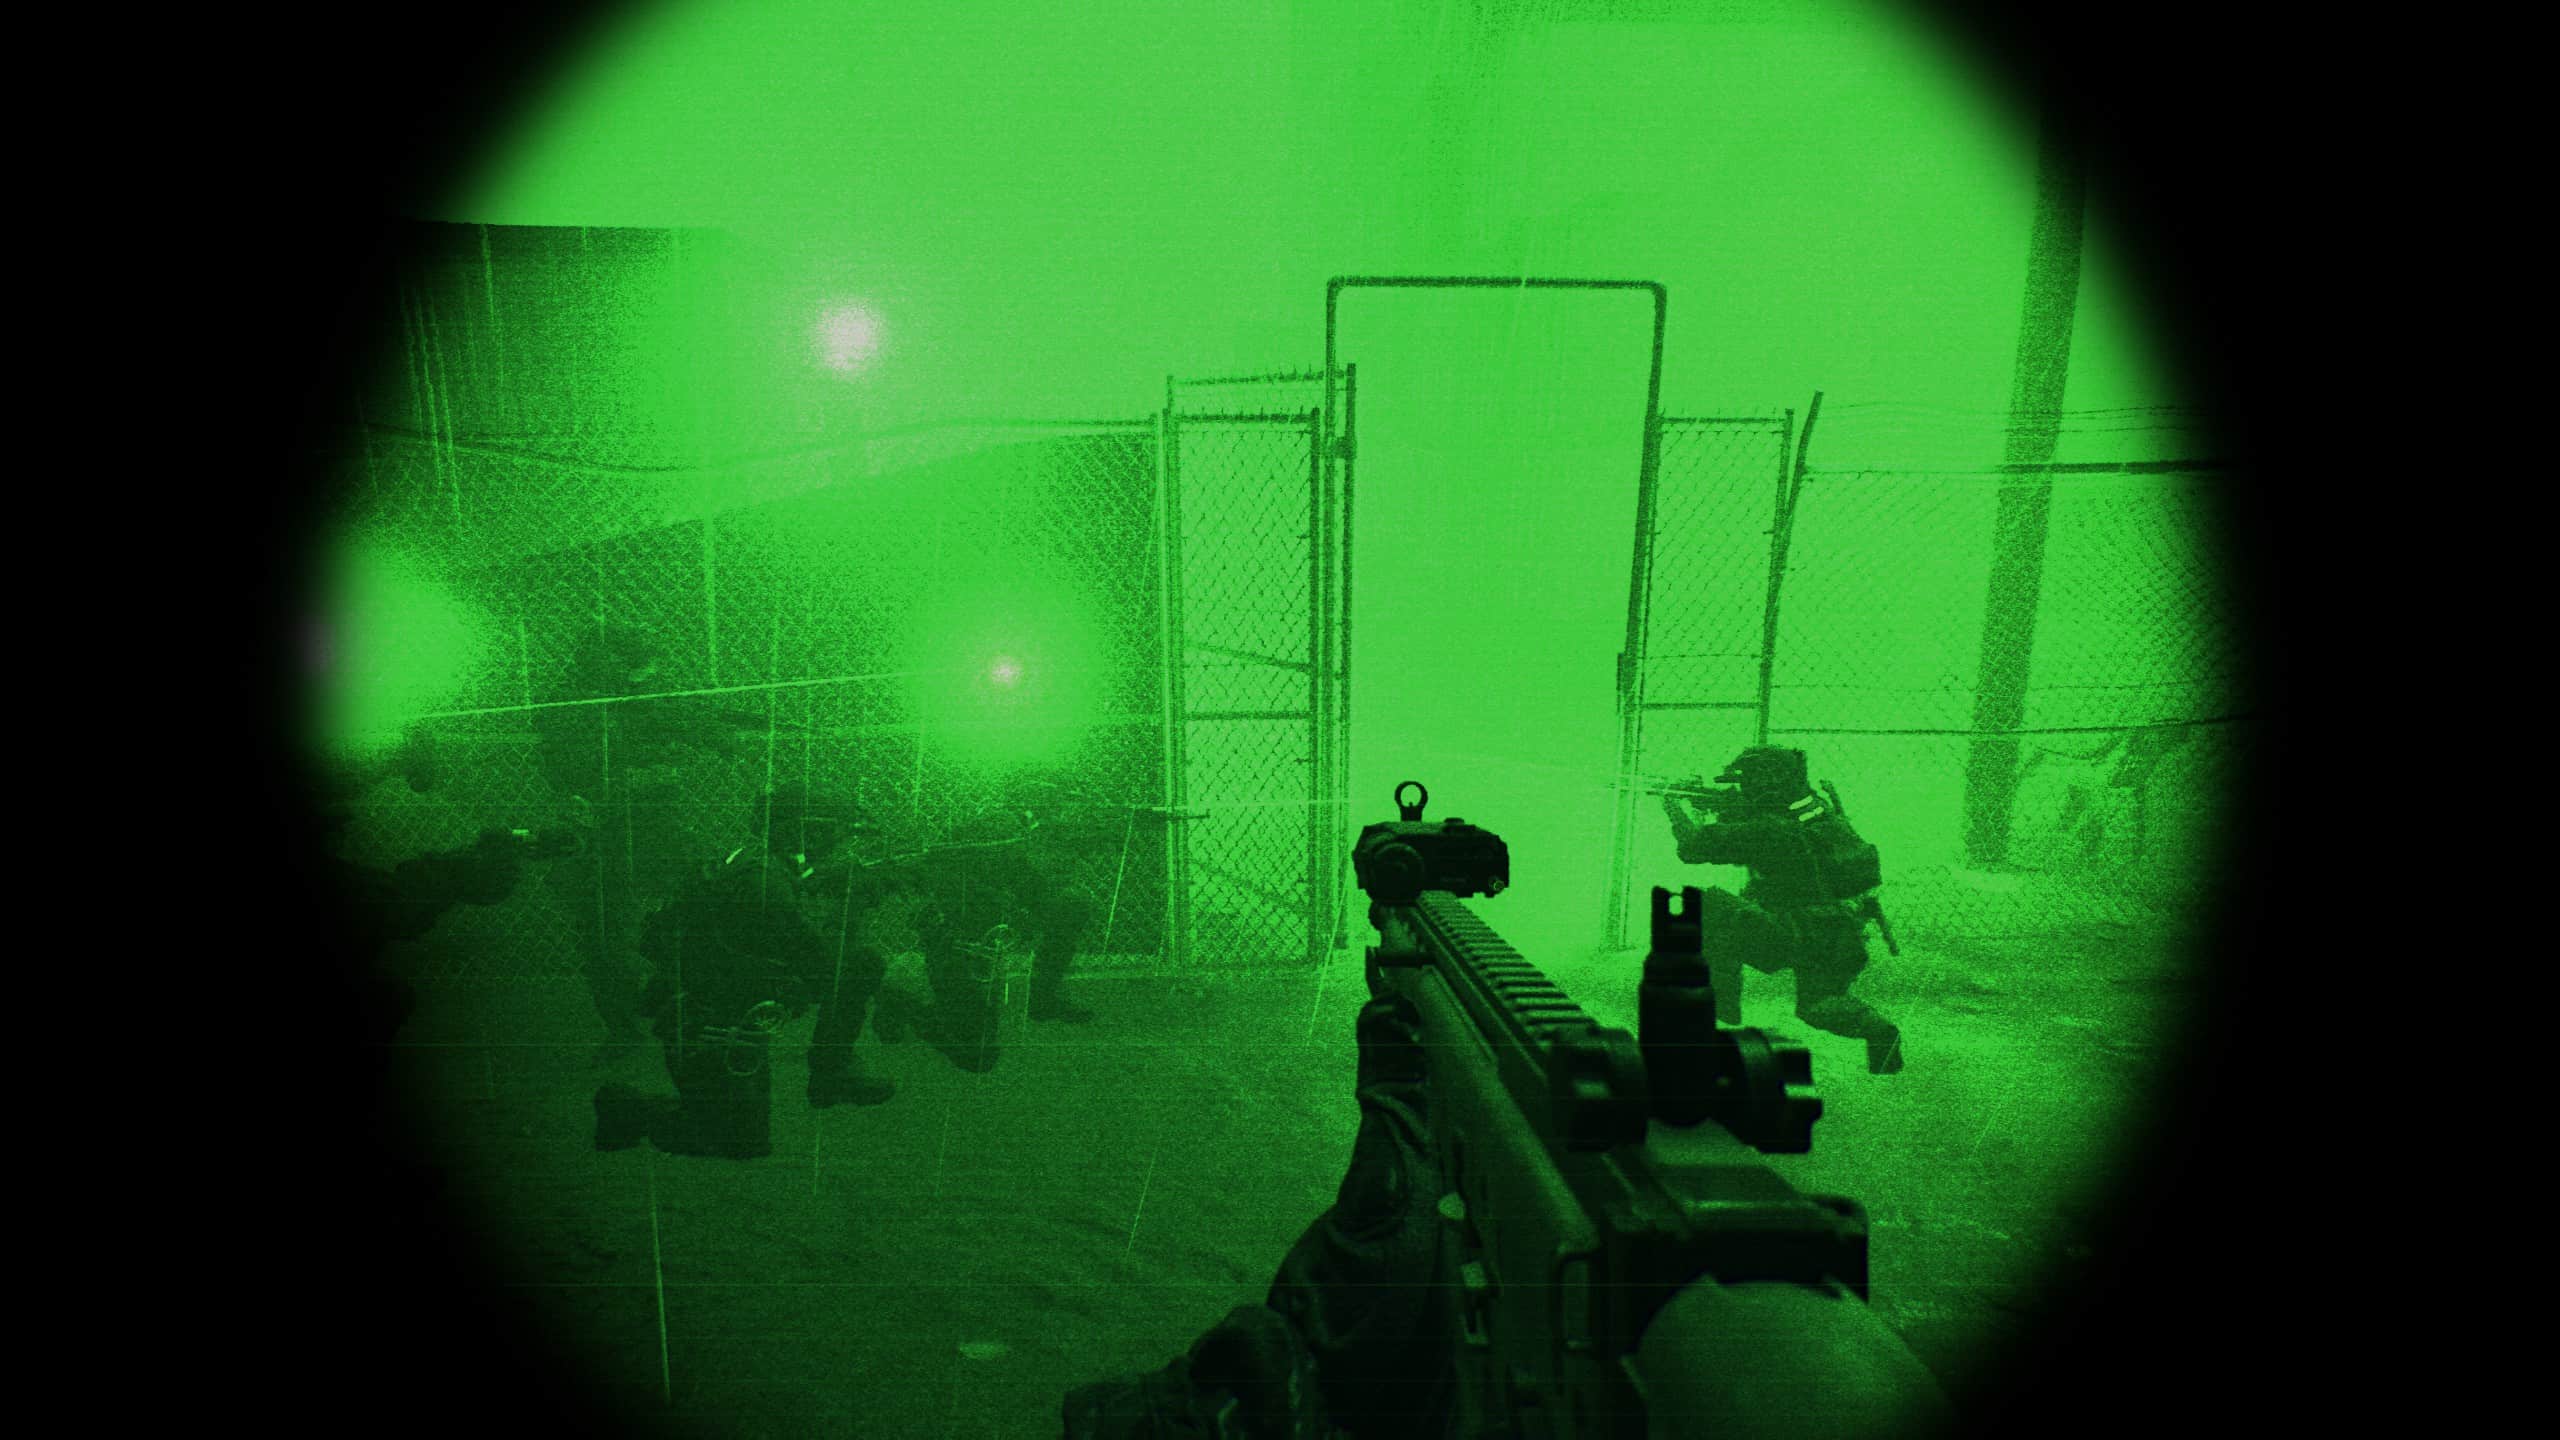 Wallpaper, Ready or Not, police, SWAT, night vision goggles, FN SCAR, AN PEQ 15 2560x1440